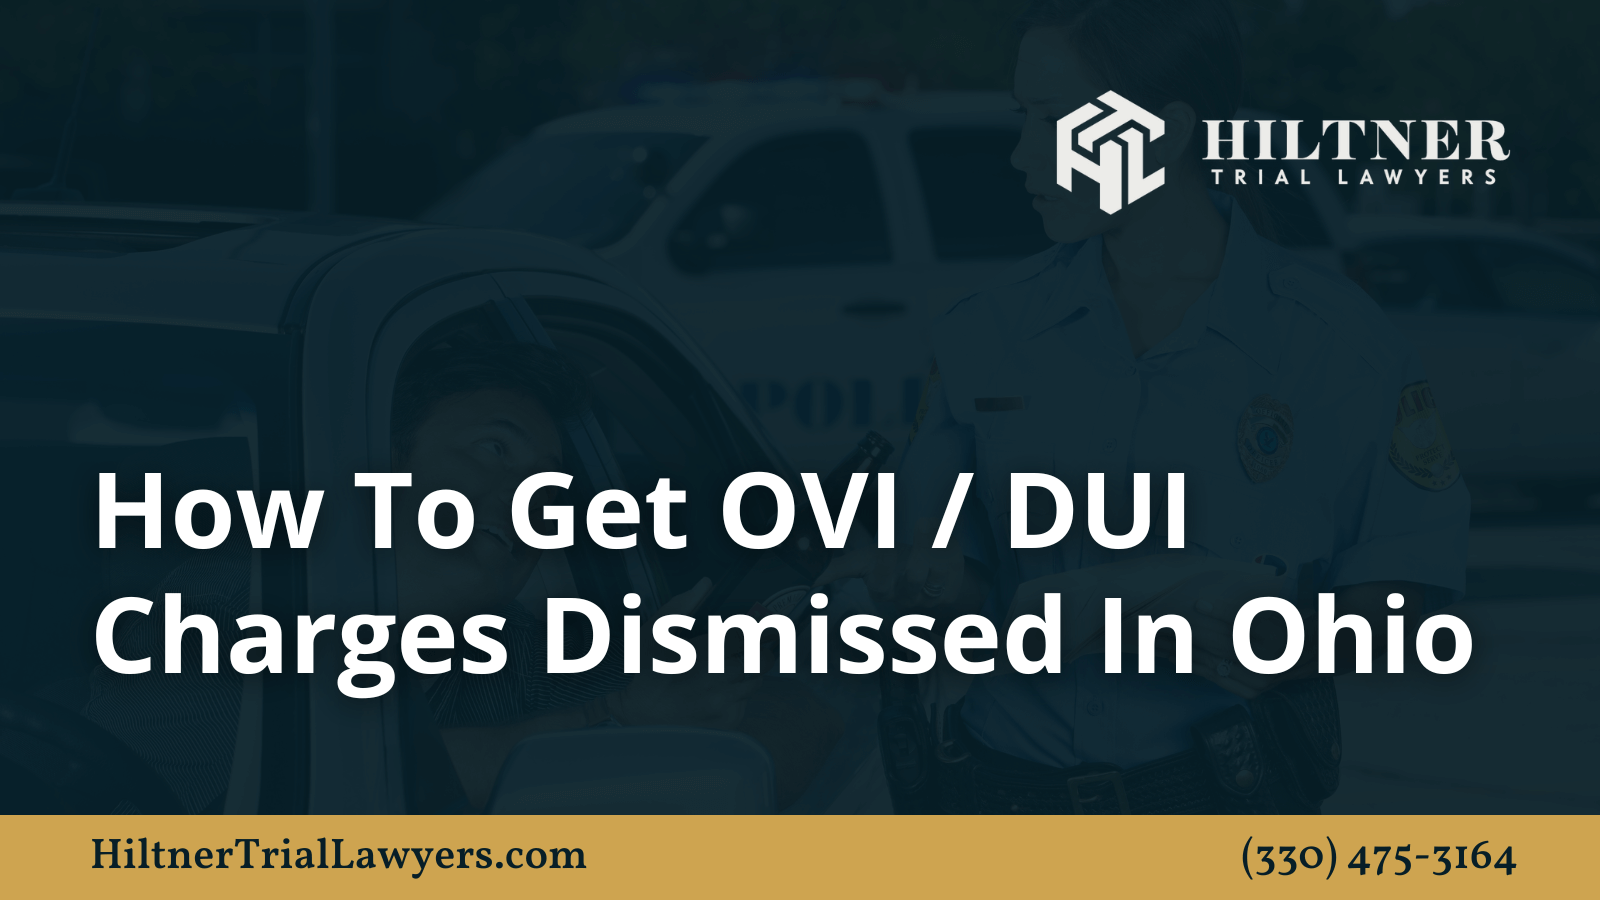 How To Get OVI / DUI Charges Dismissed In Ohio - Hiltner Trial Lawyers Ohio - max hiltner